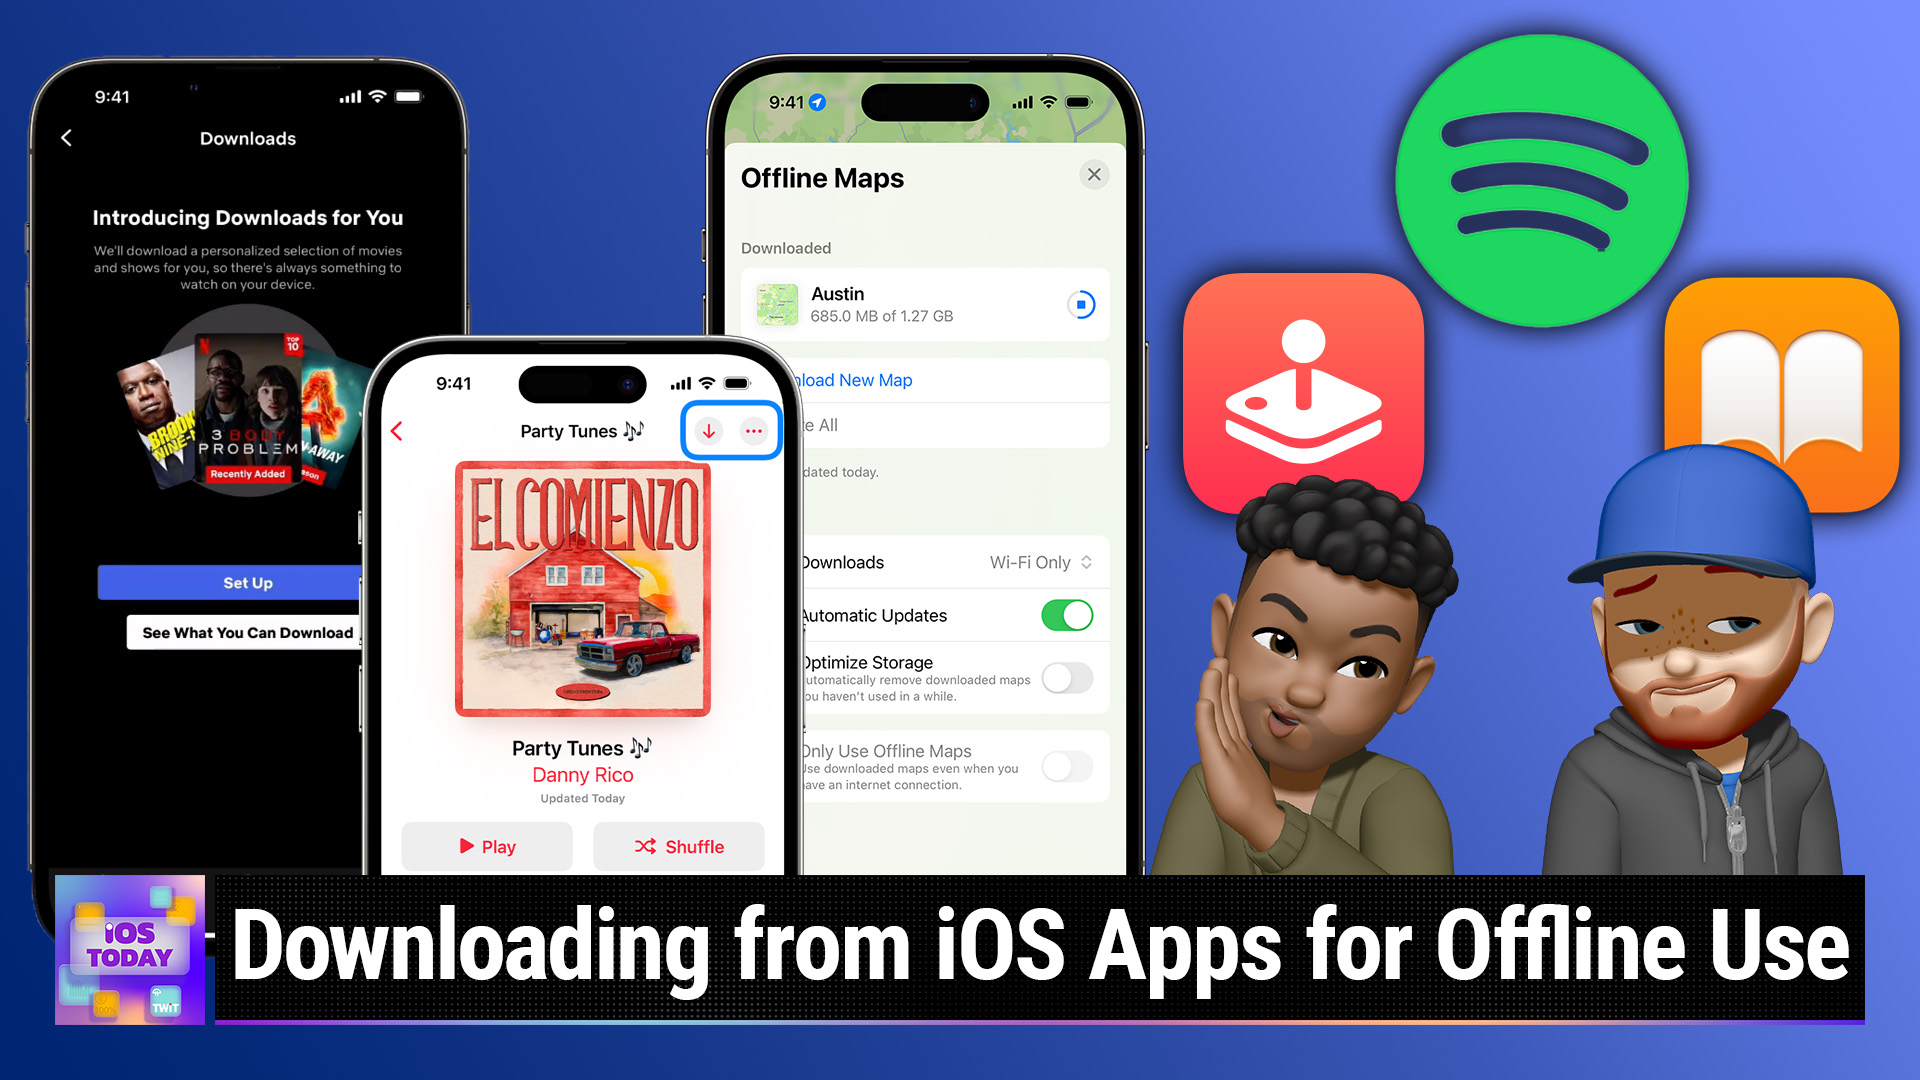 Using Your iPhone Apps Offline (iOS Today #698)